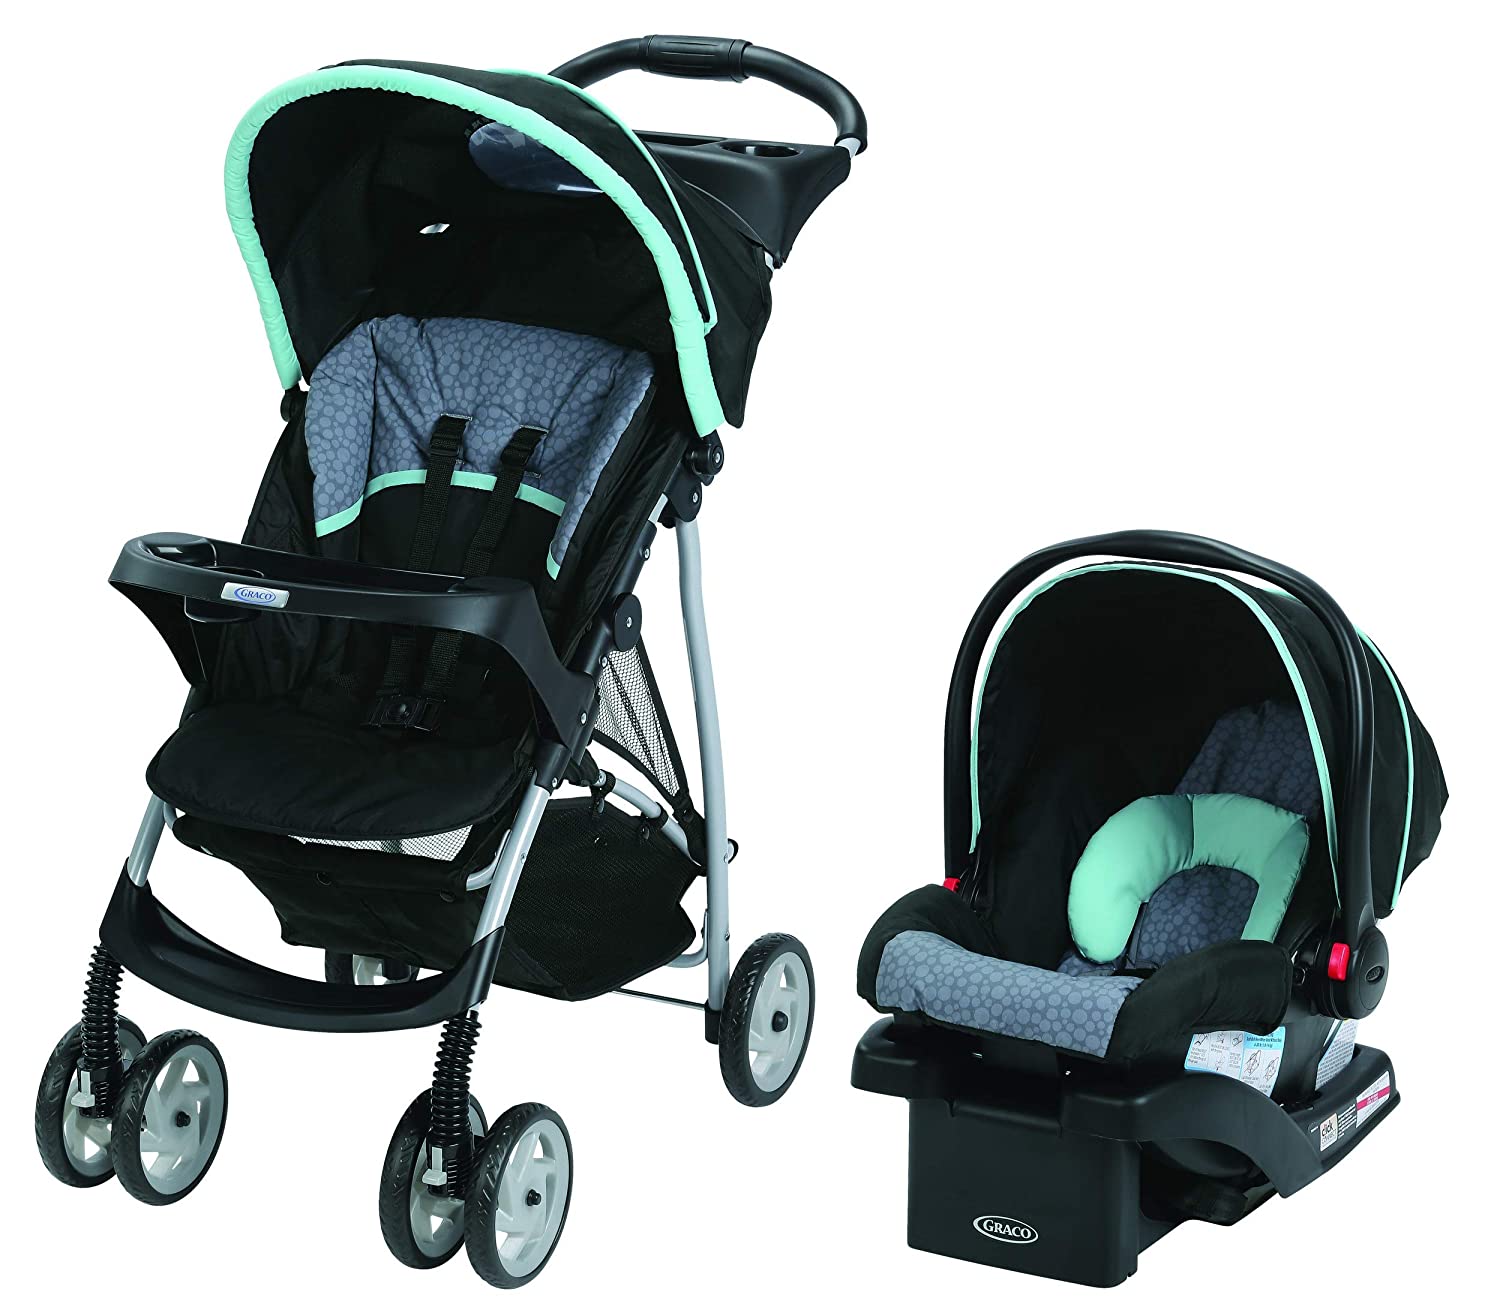 Top 5 Best Infant Travel Systems Reviews in 2022 1